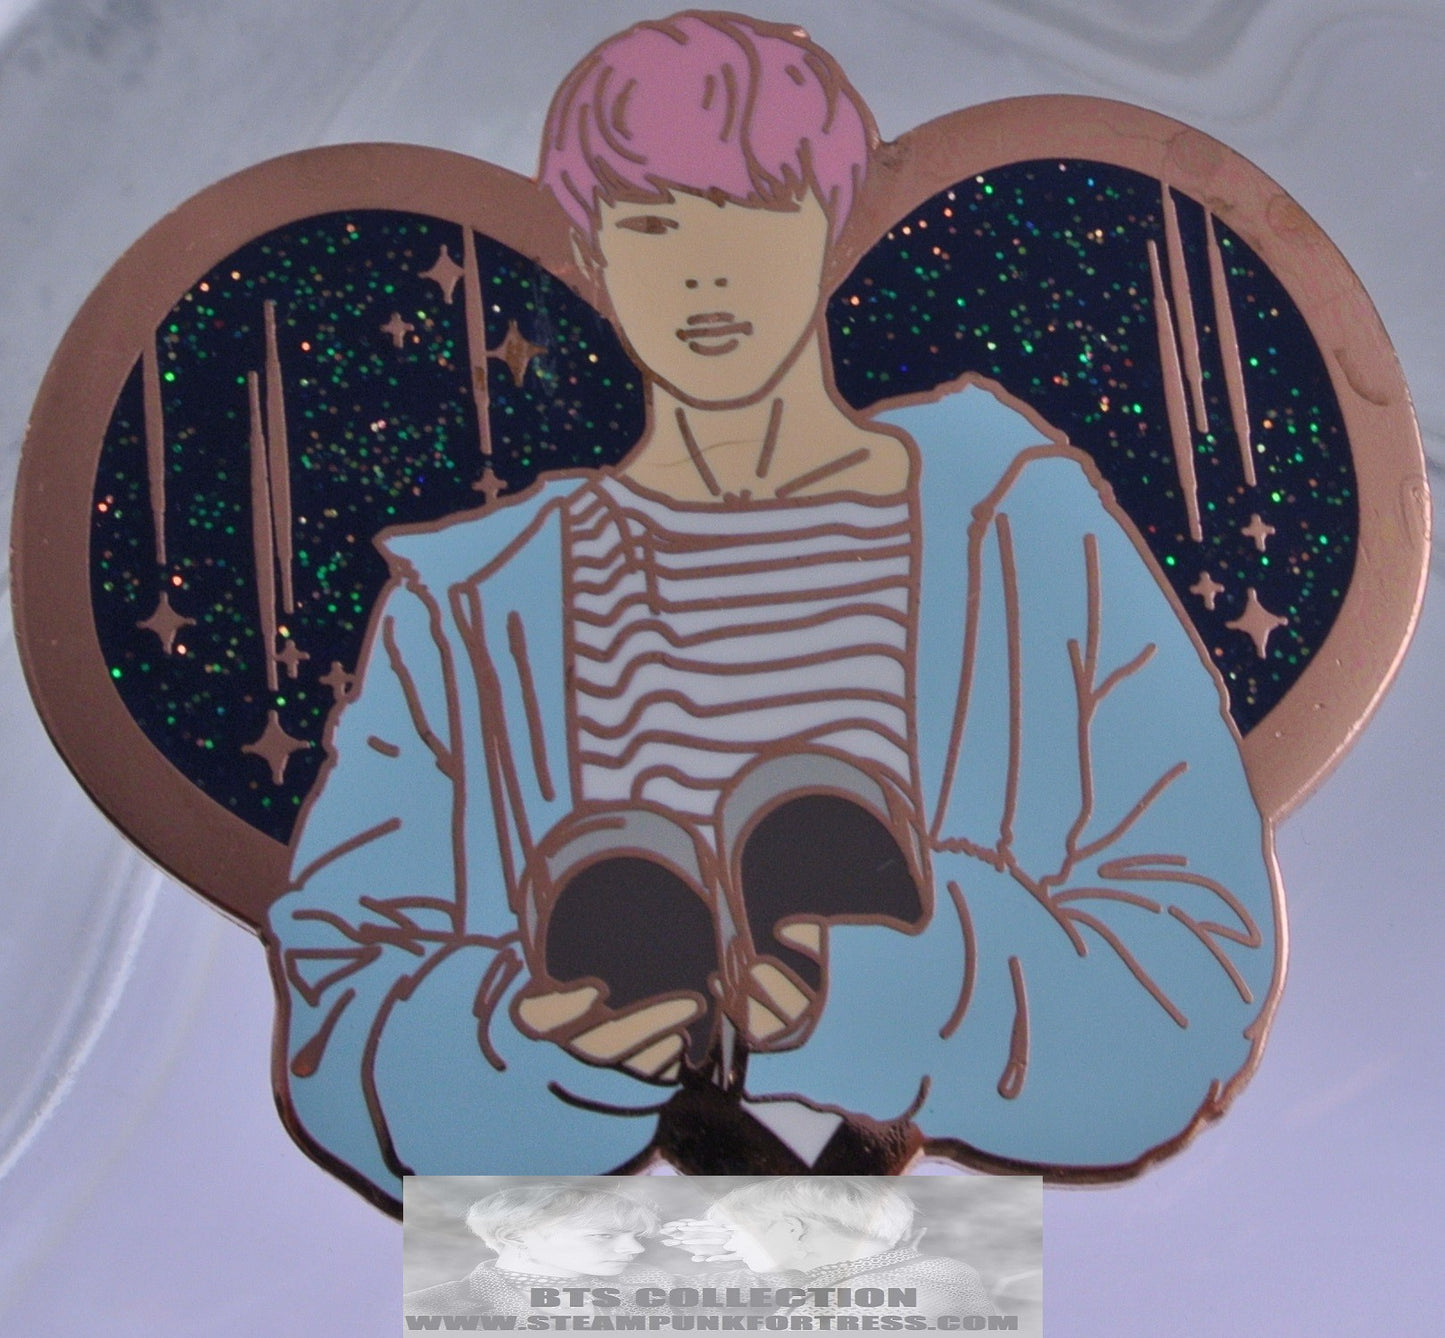 BTS ENAMEL PIN BADGE ROSE GOLD COPPER PARK JIMIN SPRING DAY PINK HAIR HEART SHOES NICUBIII PINS BUTTON